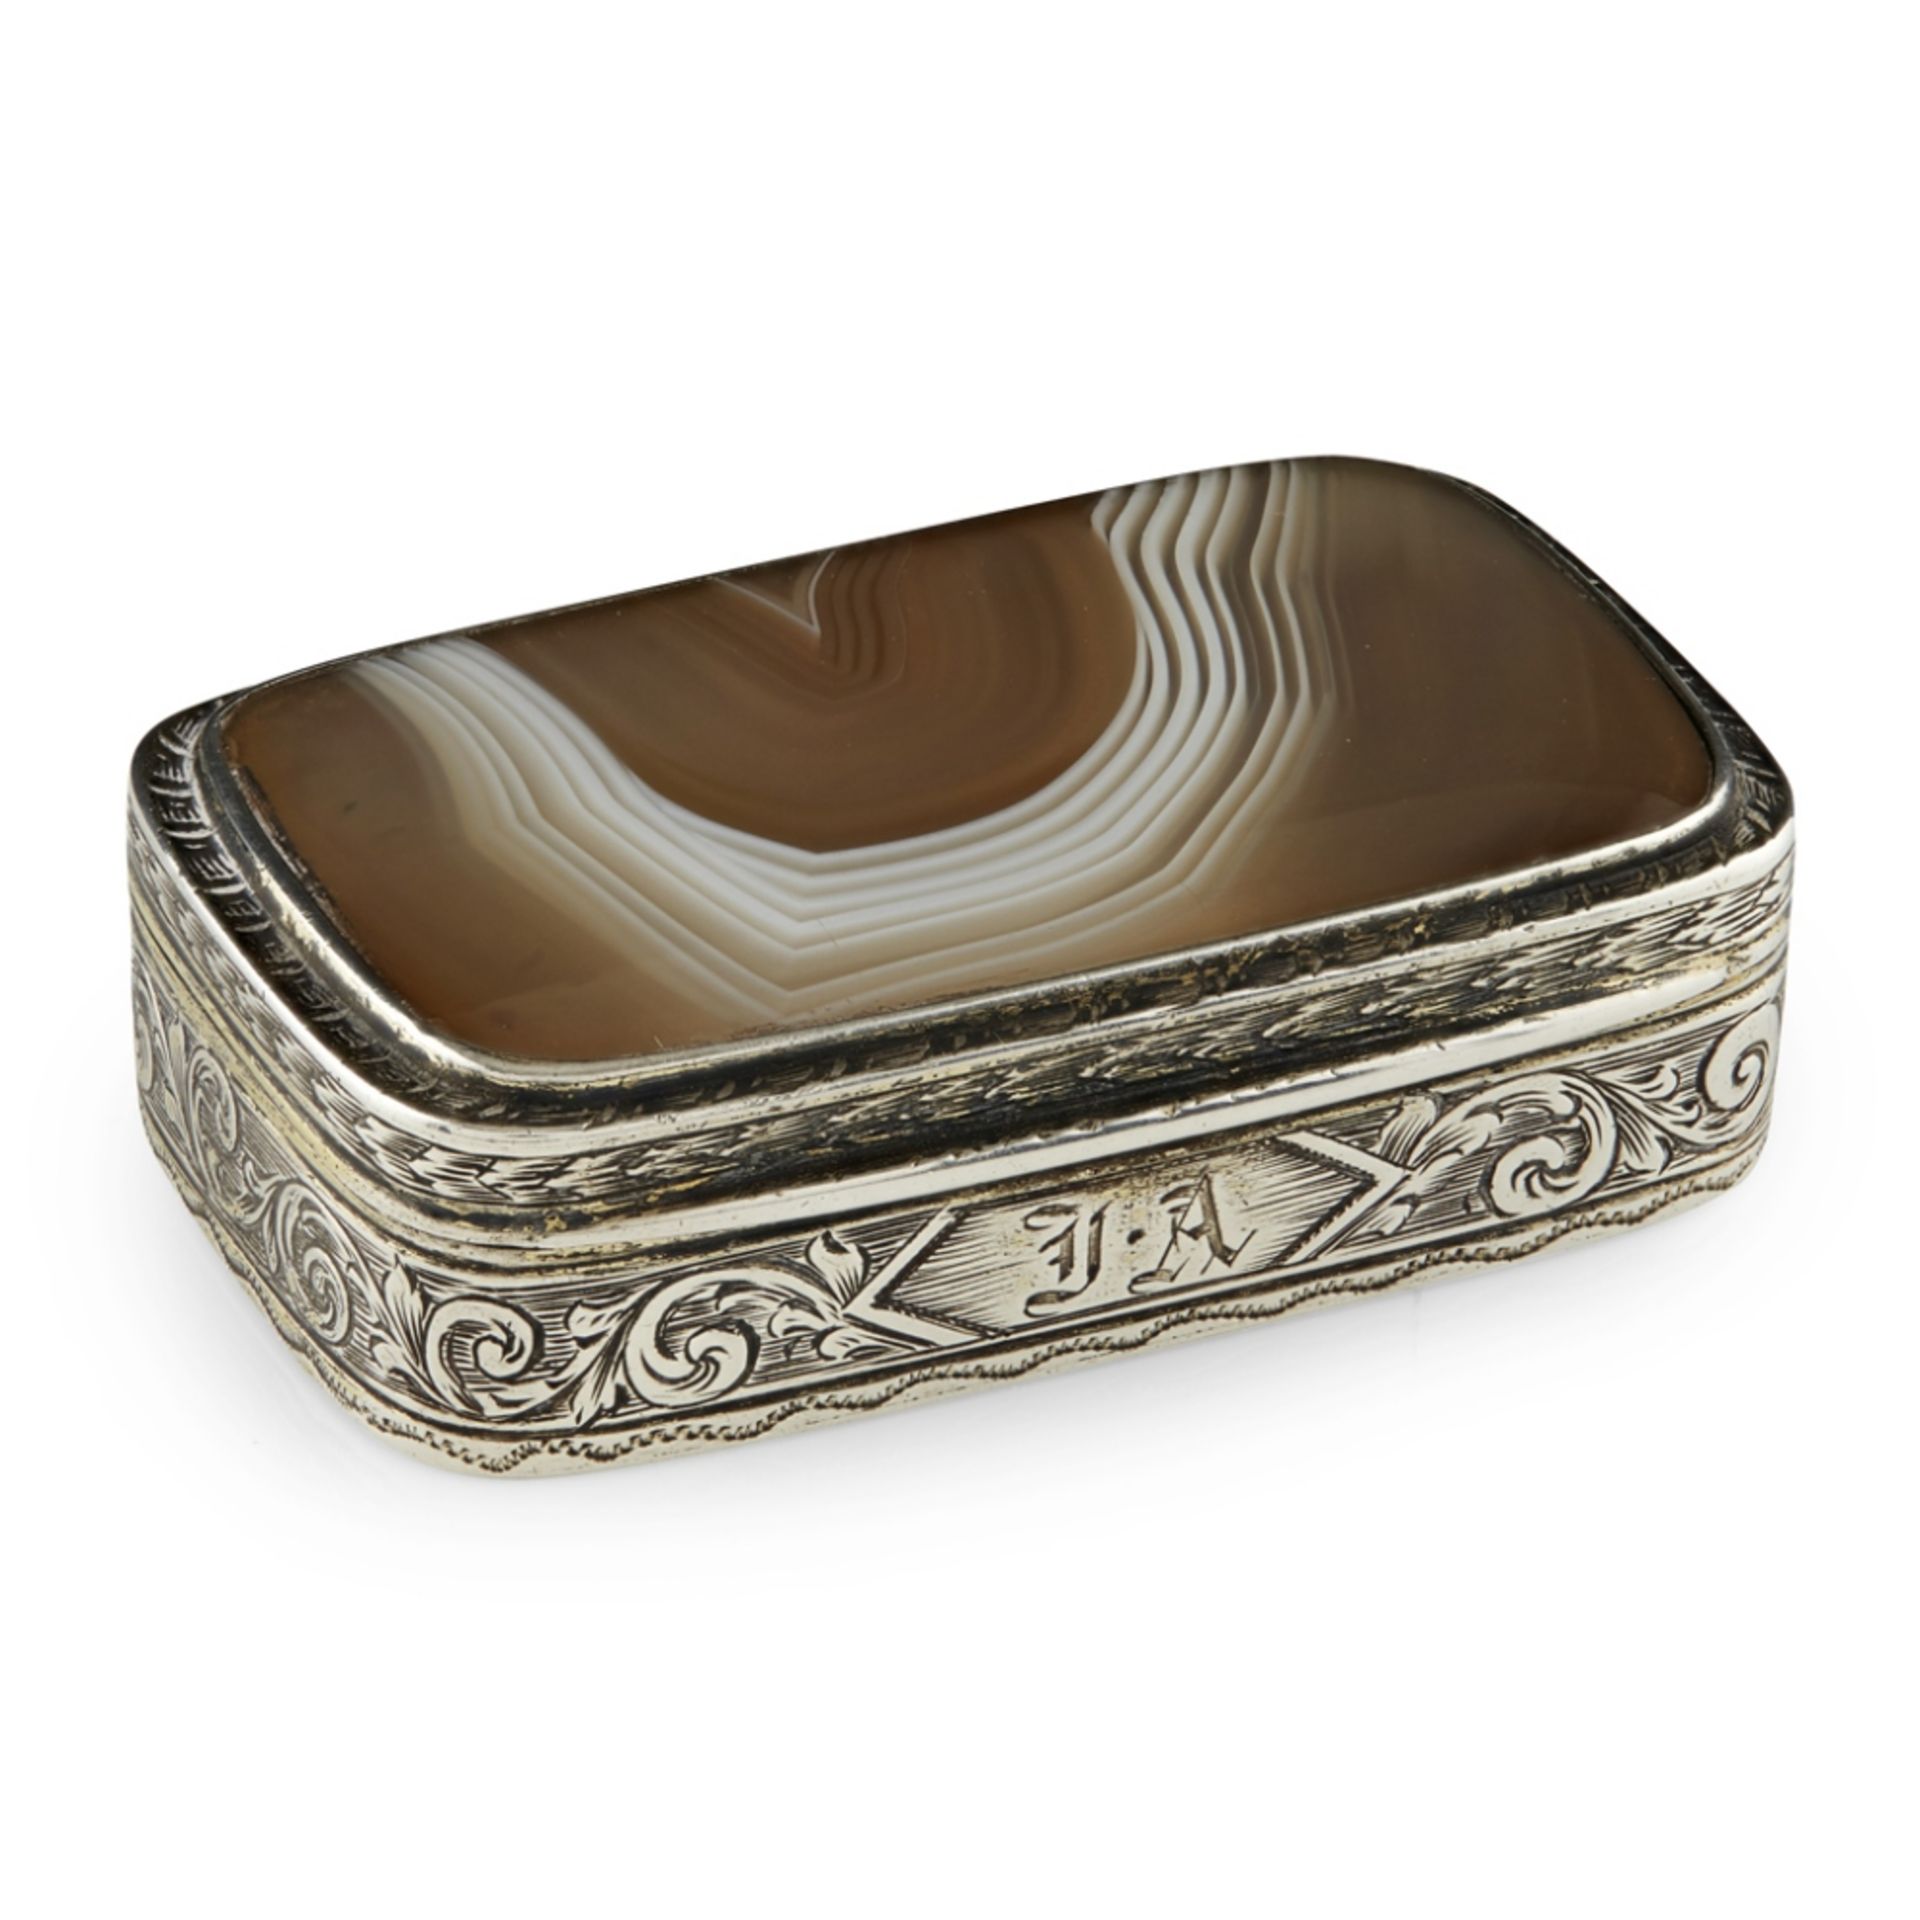 DUNDEE - A SCOTTISH PROVINCIAL AGATE SET SNUFF BOX WILLIAM LEIGHTON marked WL twice, of